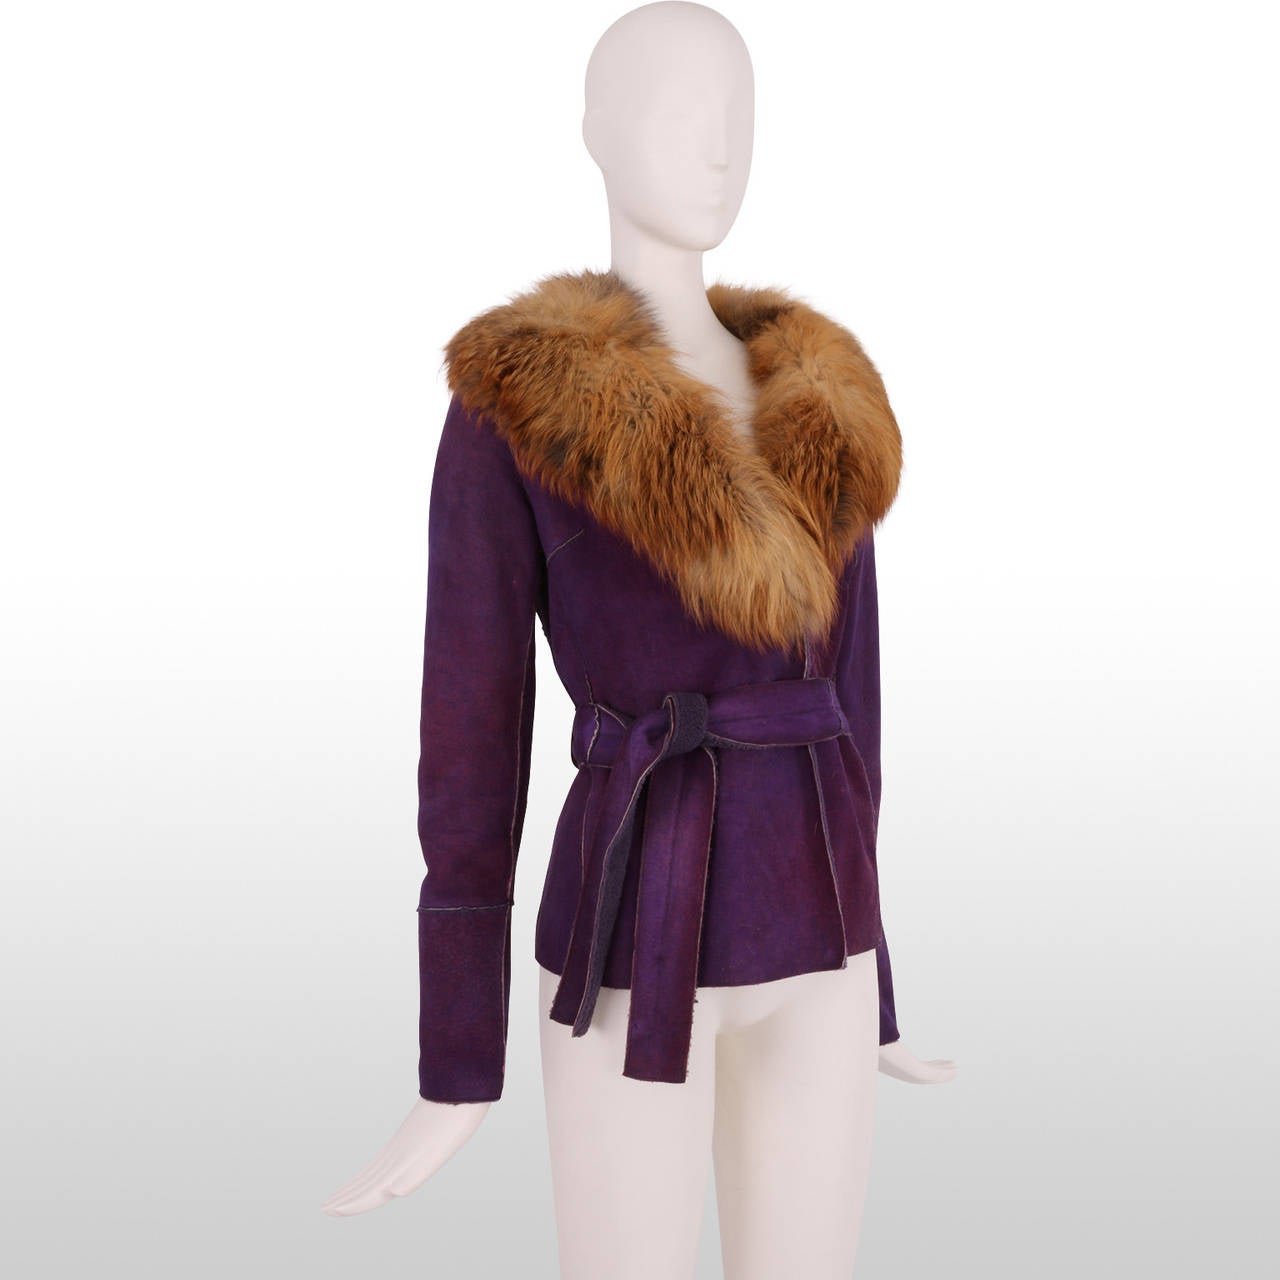 The perfect transitional jacket to take you from autumn into winter, this rich regal purple shearling jacket has a short clipped wool lining and the collar is trimmed in fur. The jacket closes with two snaps and a detachable belt to close. It is in